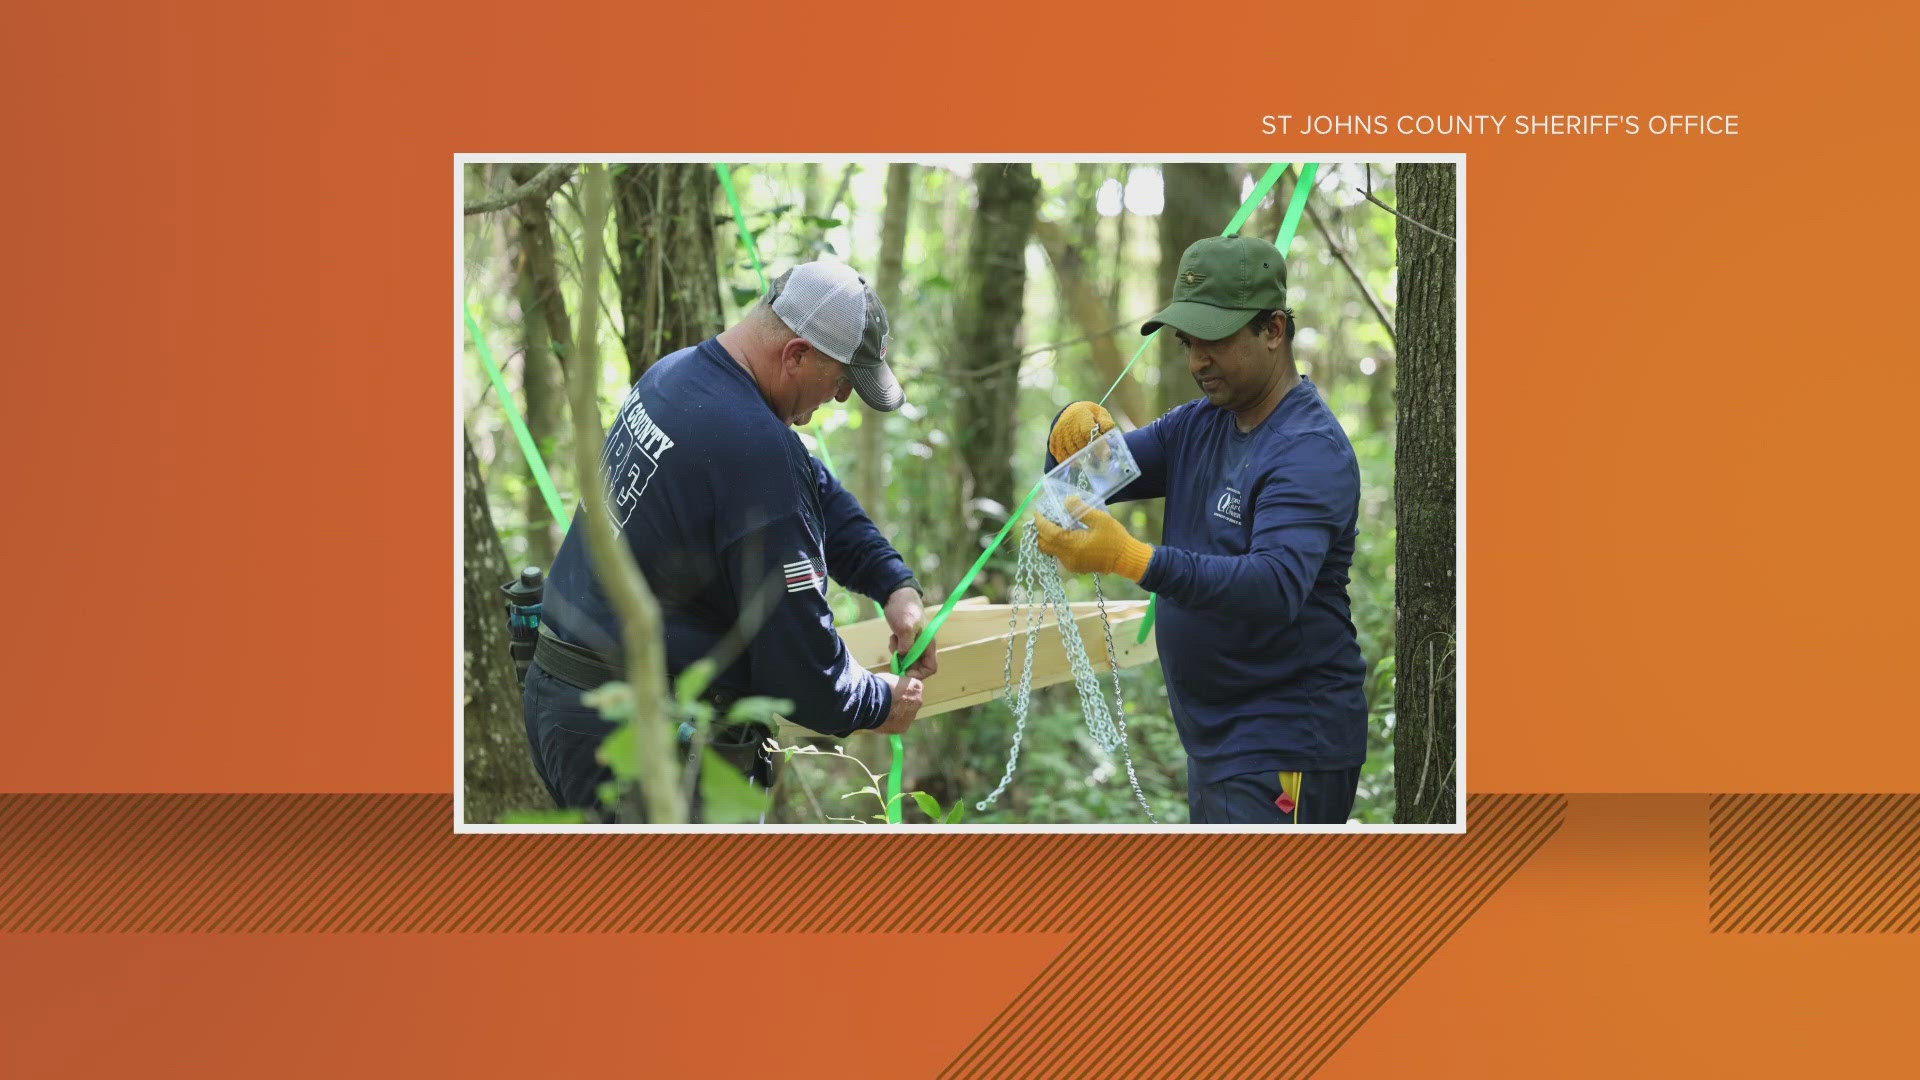 Human remains were found on private property in Flagler Estates off of Cedar Ford Blvd. on Feb. 8. Police are still searching for additional remains and evidence.